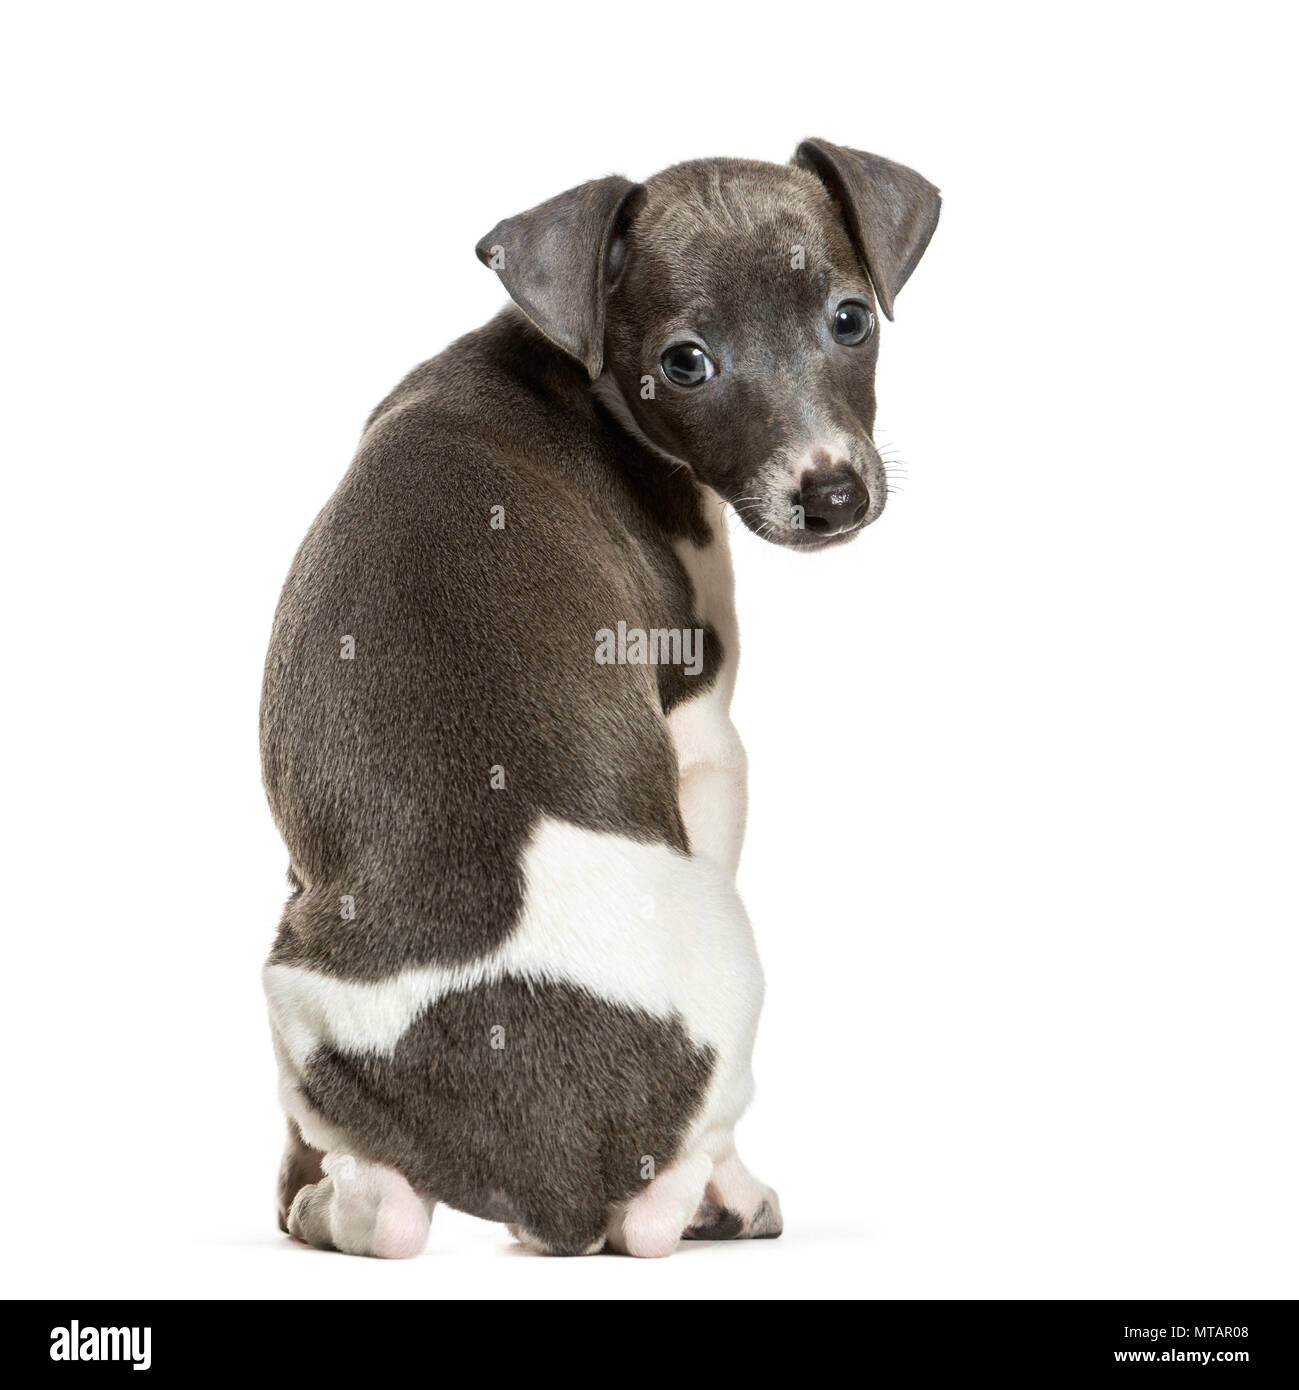 Italian Greyhound puppy sitting against white background Banque D'Images